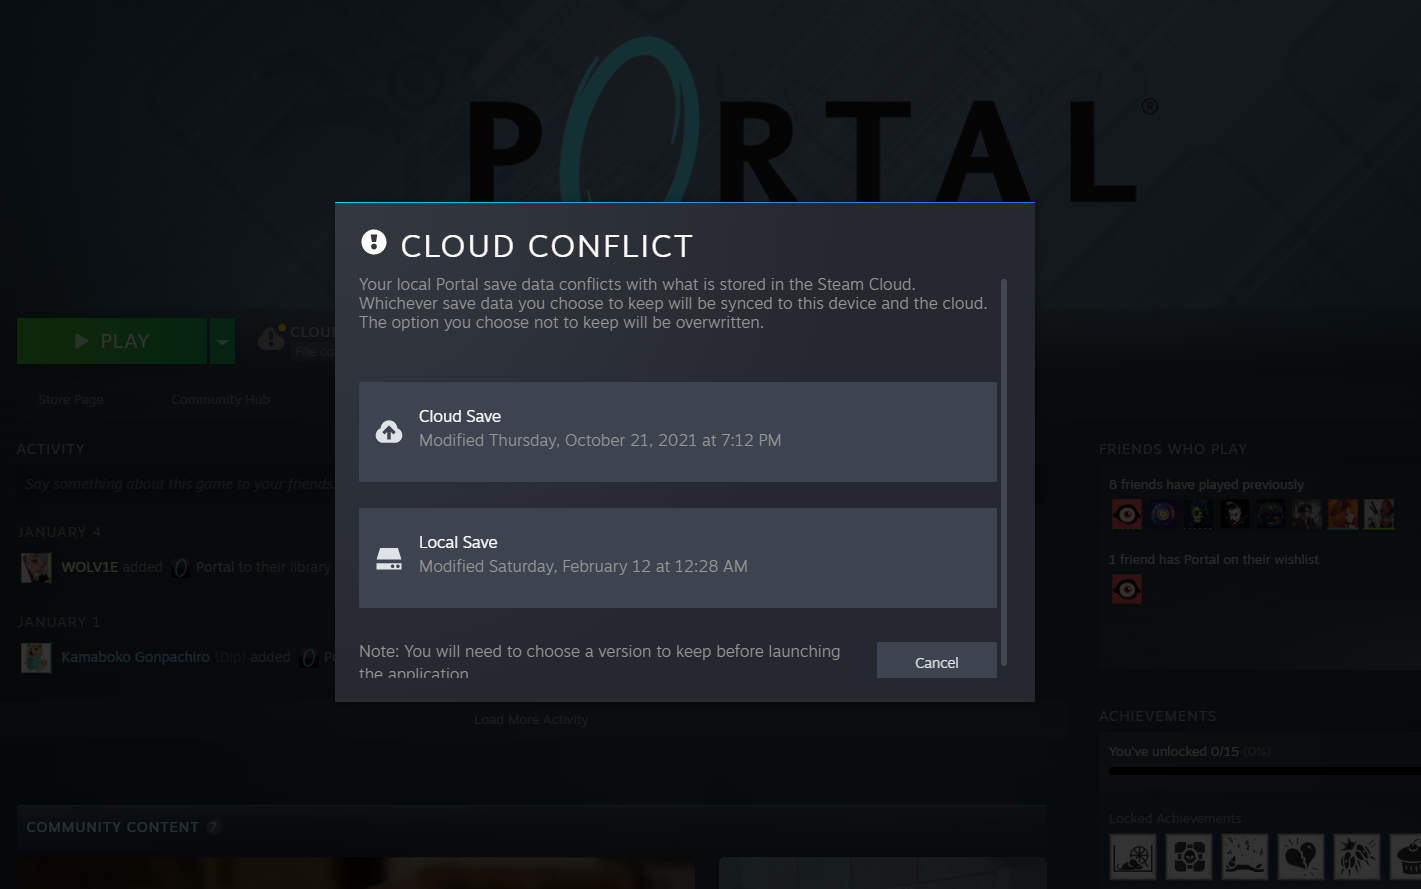 Check for Software Conflicts
Reinstall Steam